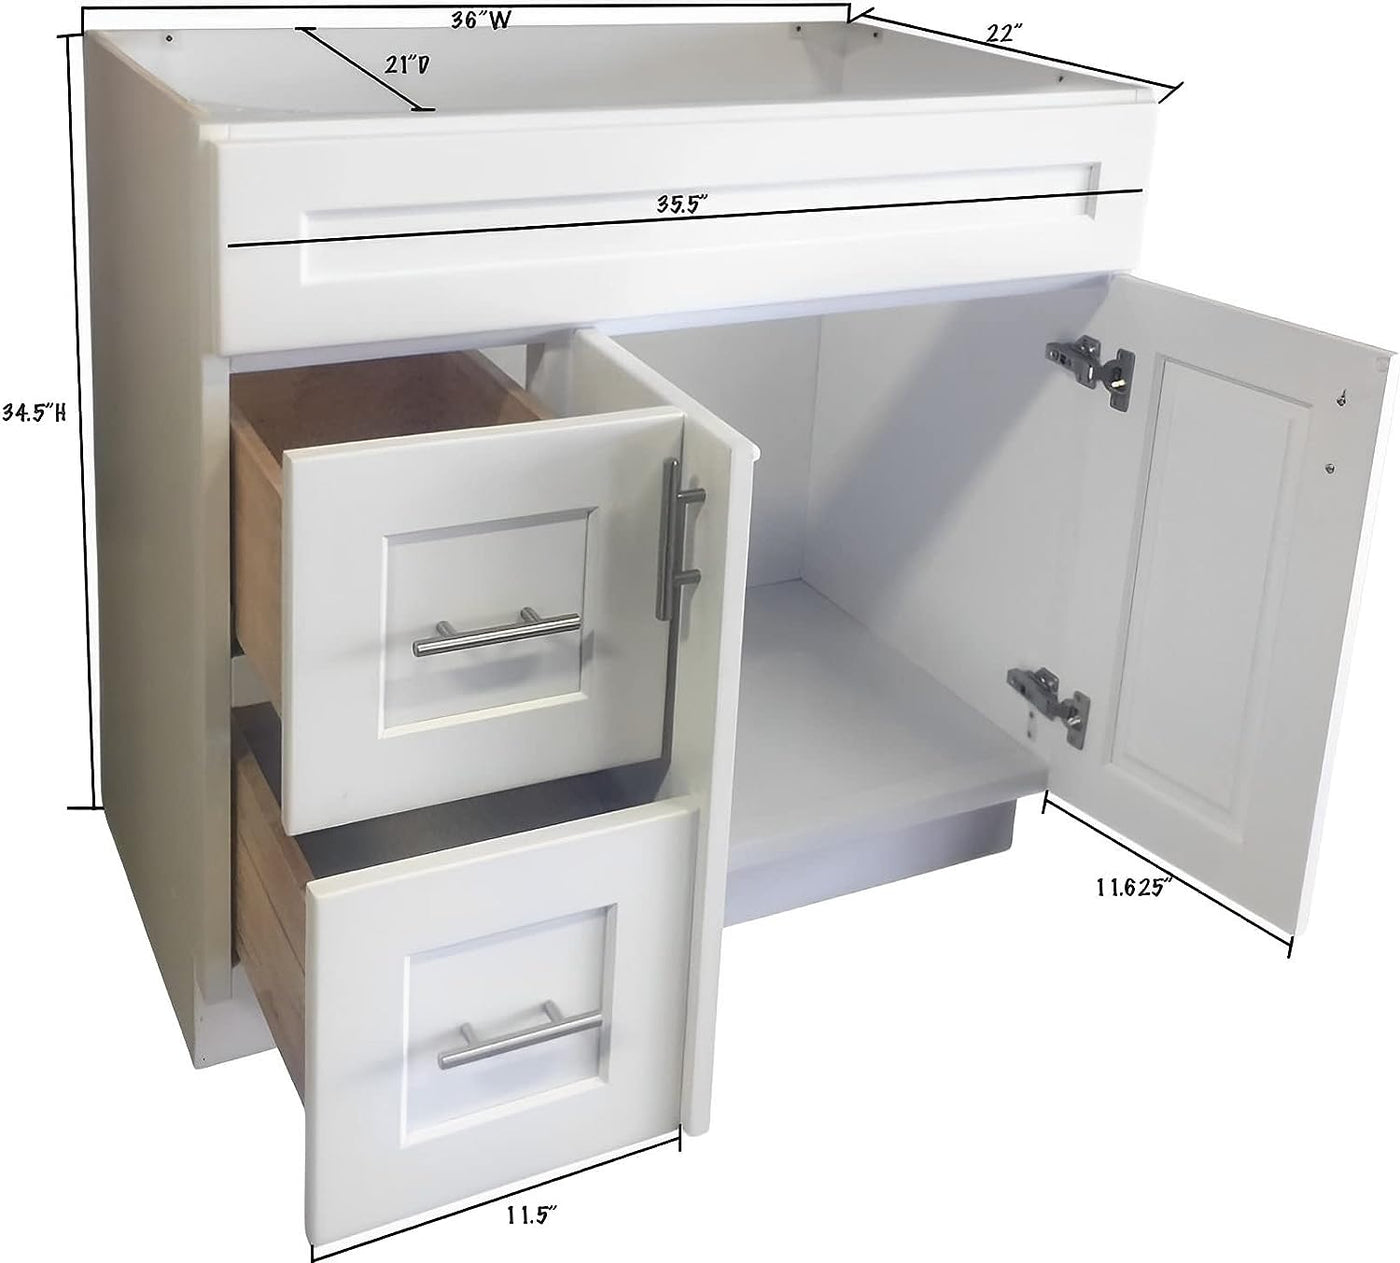 White Shaker Bathroom Vanity Sink Base with Drawers 36" Ready-to-Assemble Cabinet - $195